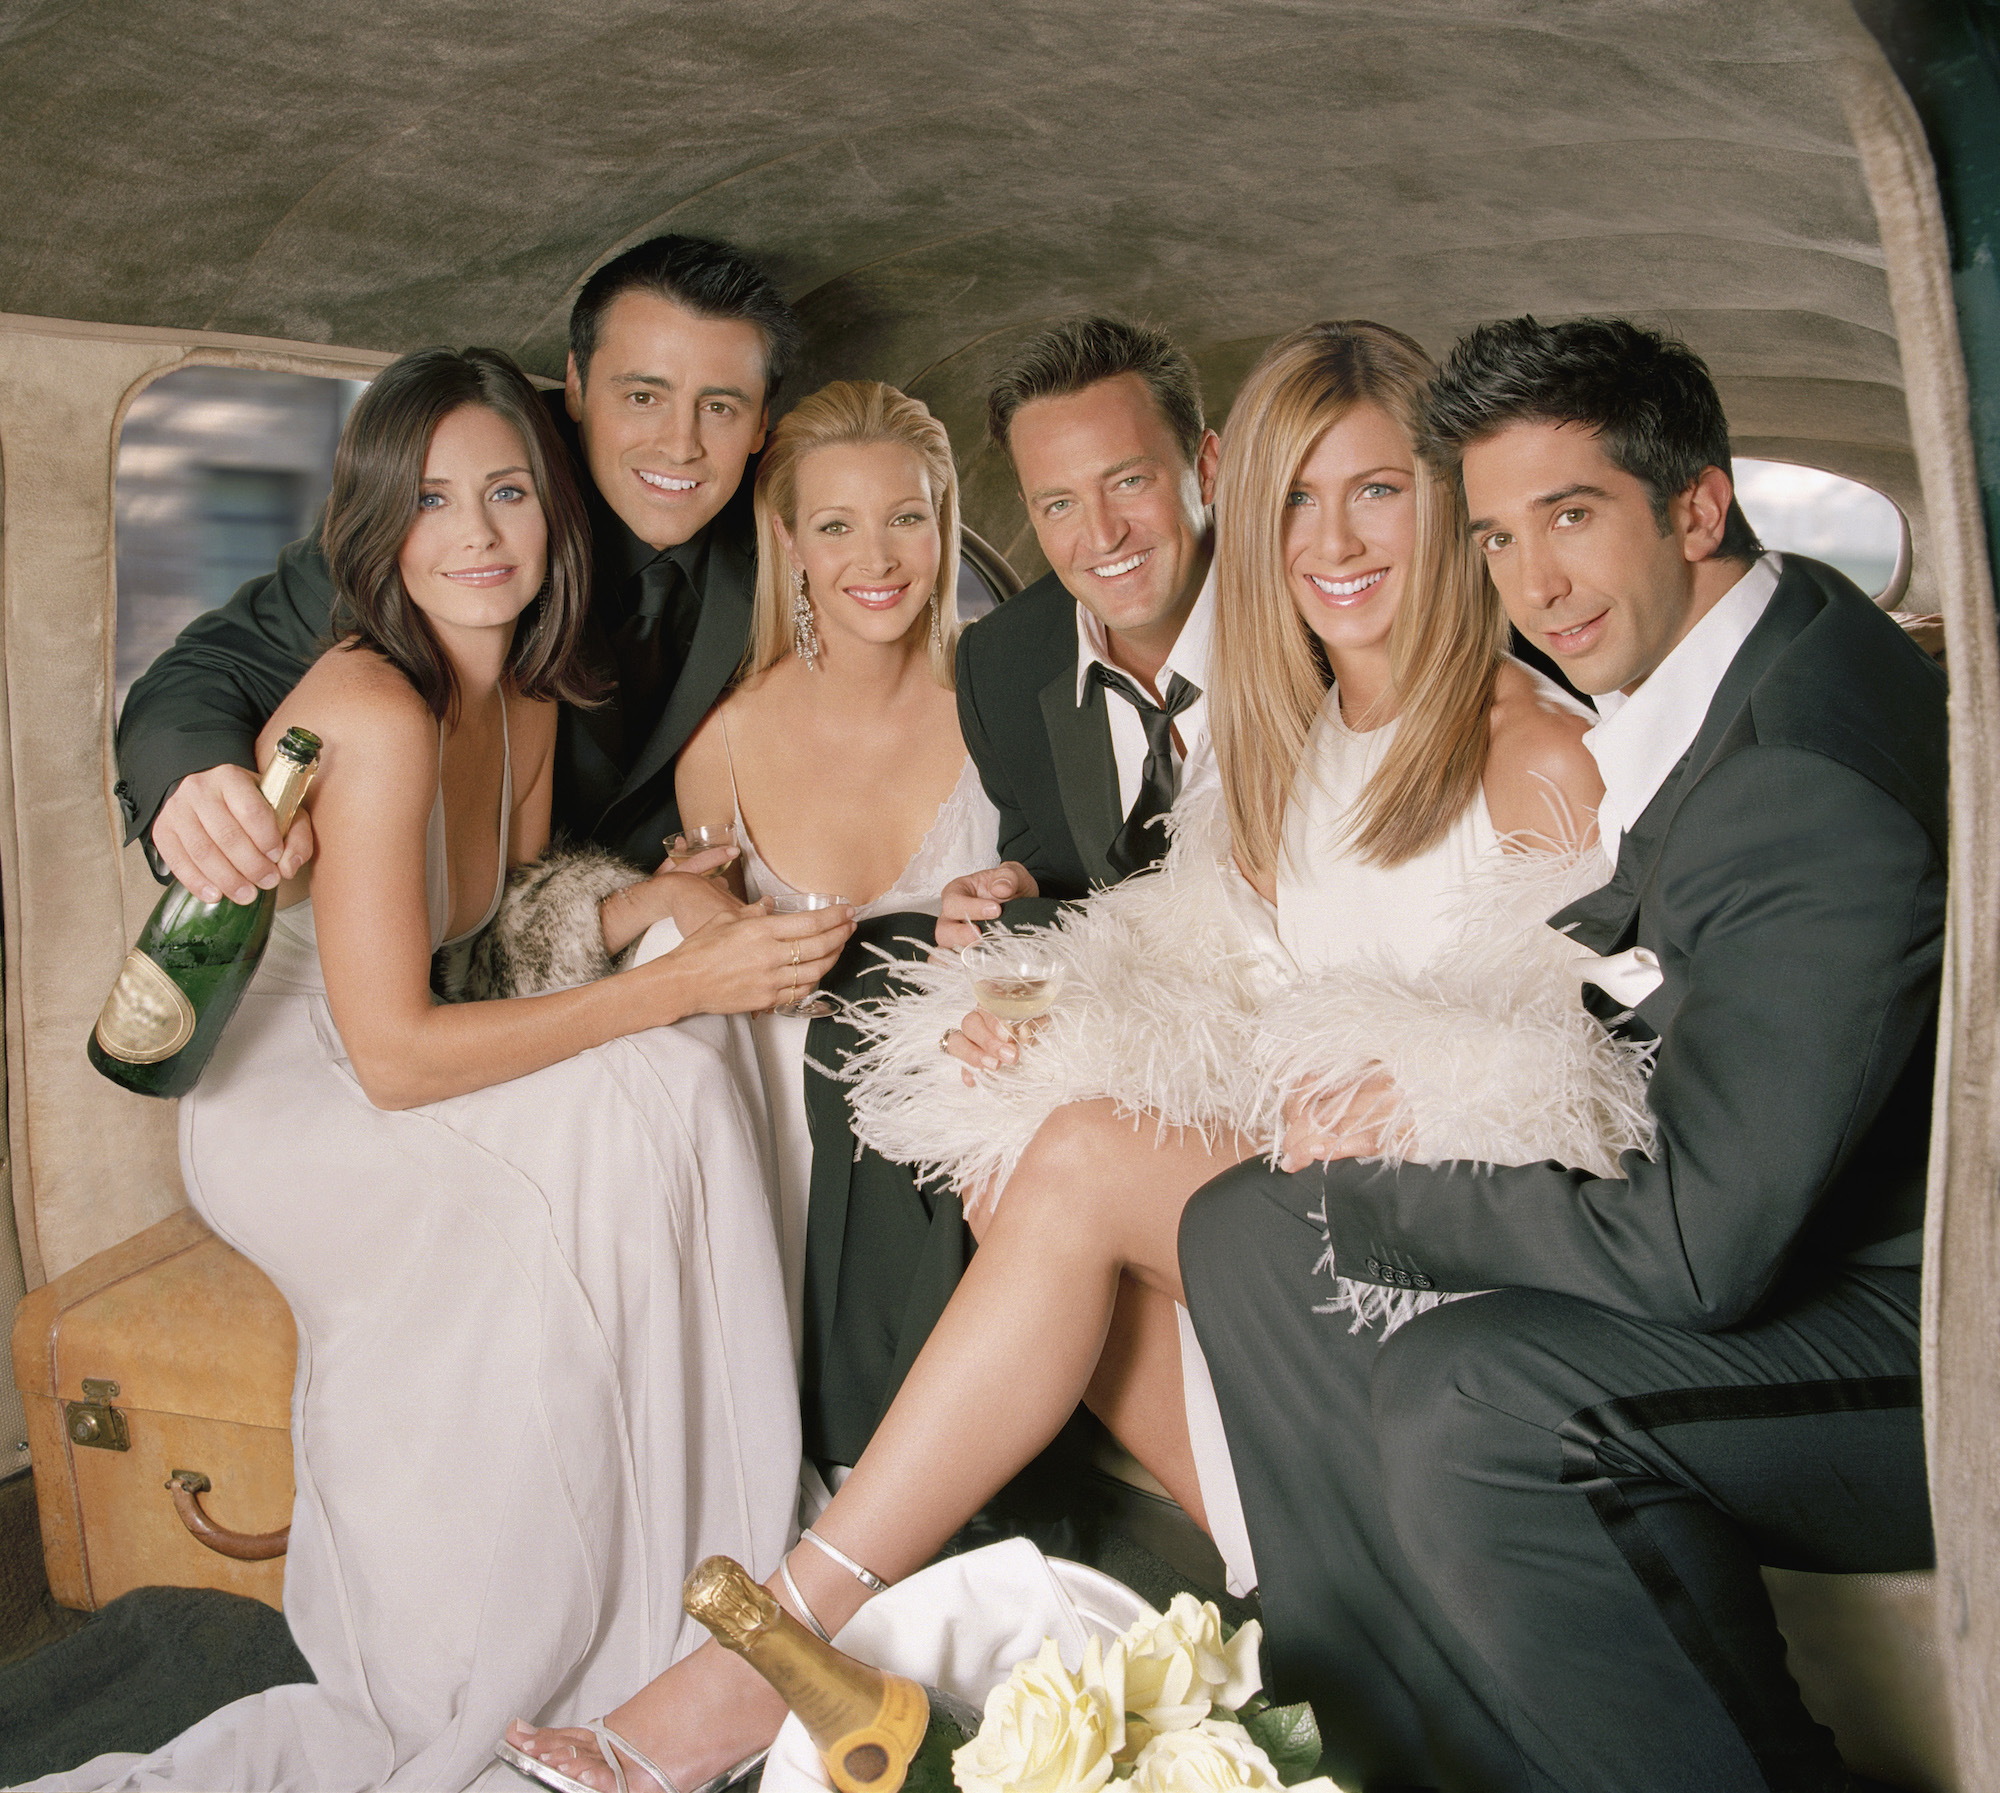 A portrait of the cast of 'Friends'